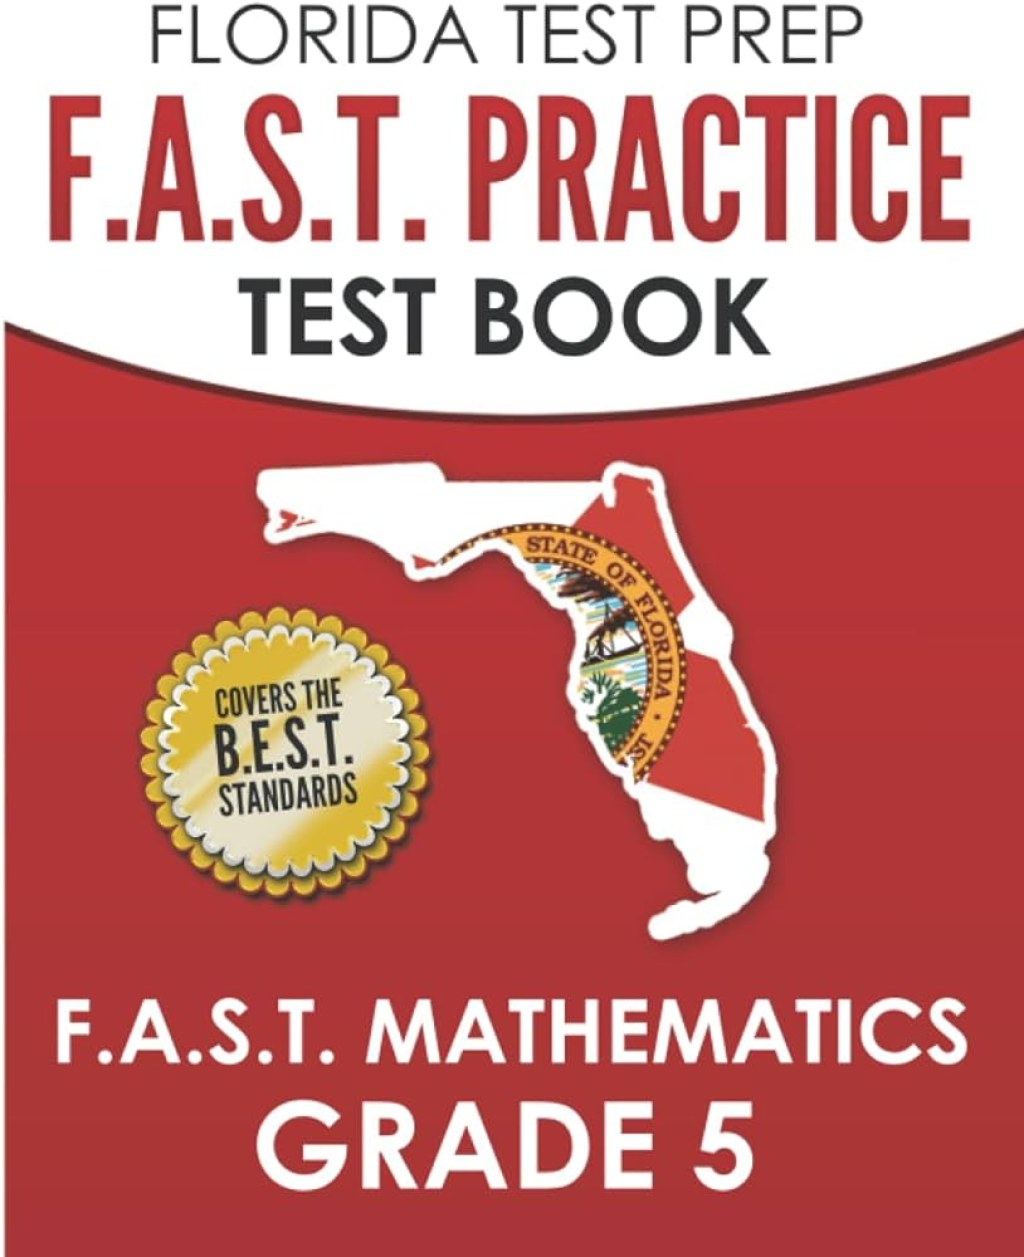 Picture of: FLORIDA TEST PREP F.A.S.T. Practice Test Book F.A.S.T. Mathematics Grade :  Covers the New B.E.S.T